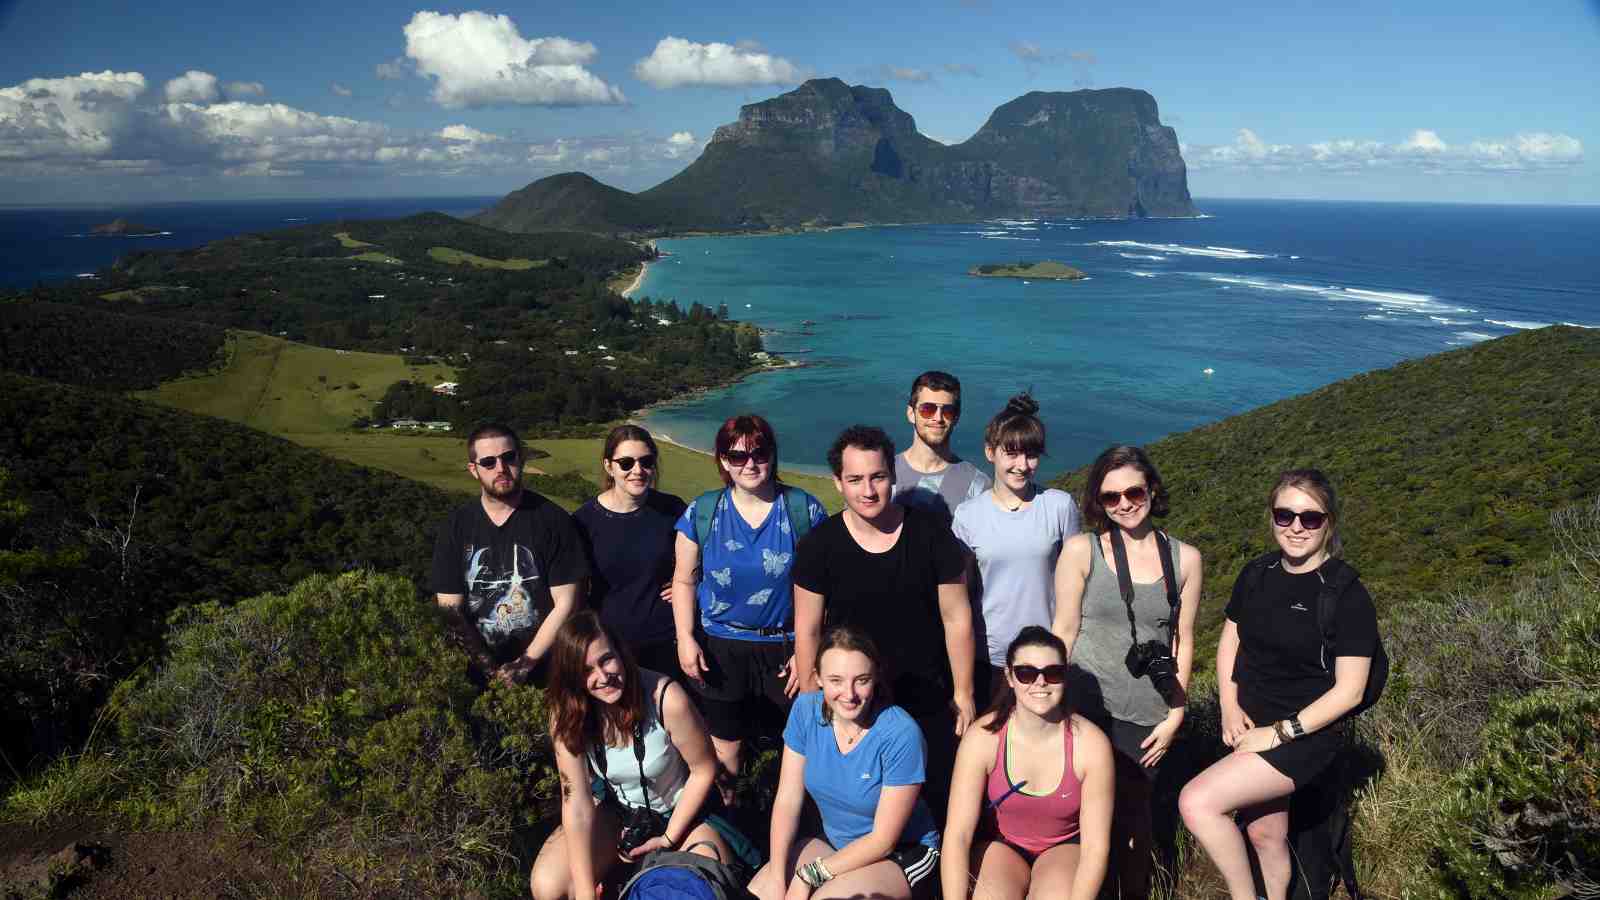 Students at the top of Malabar hill looking across the island towards Mt. Gower